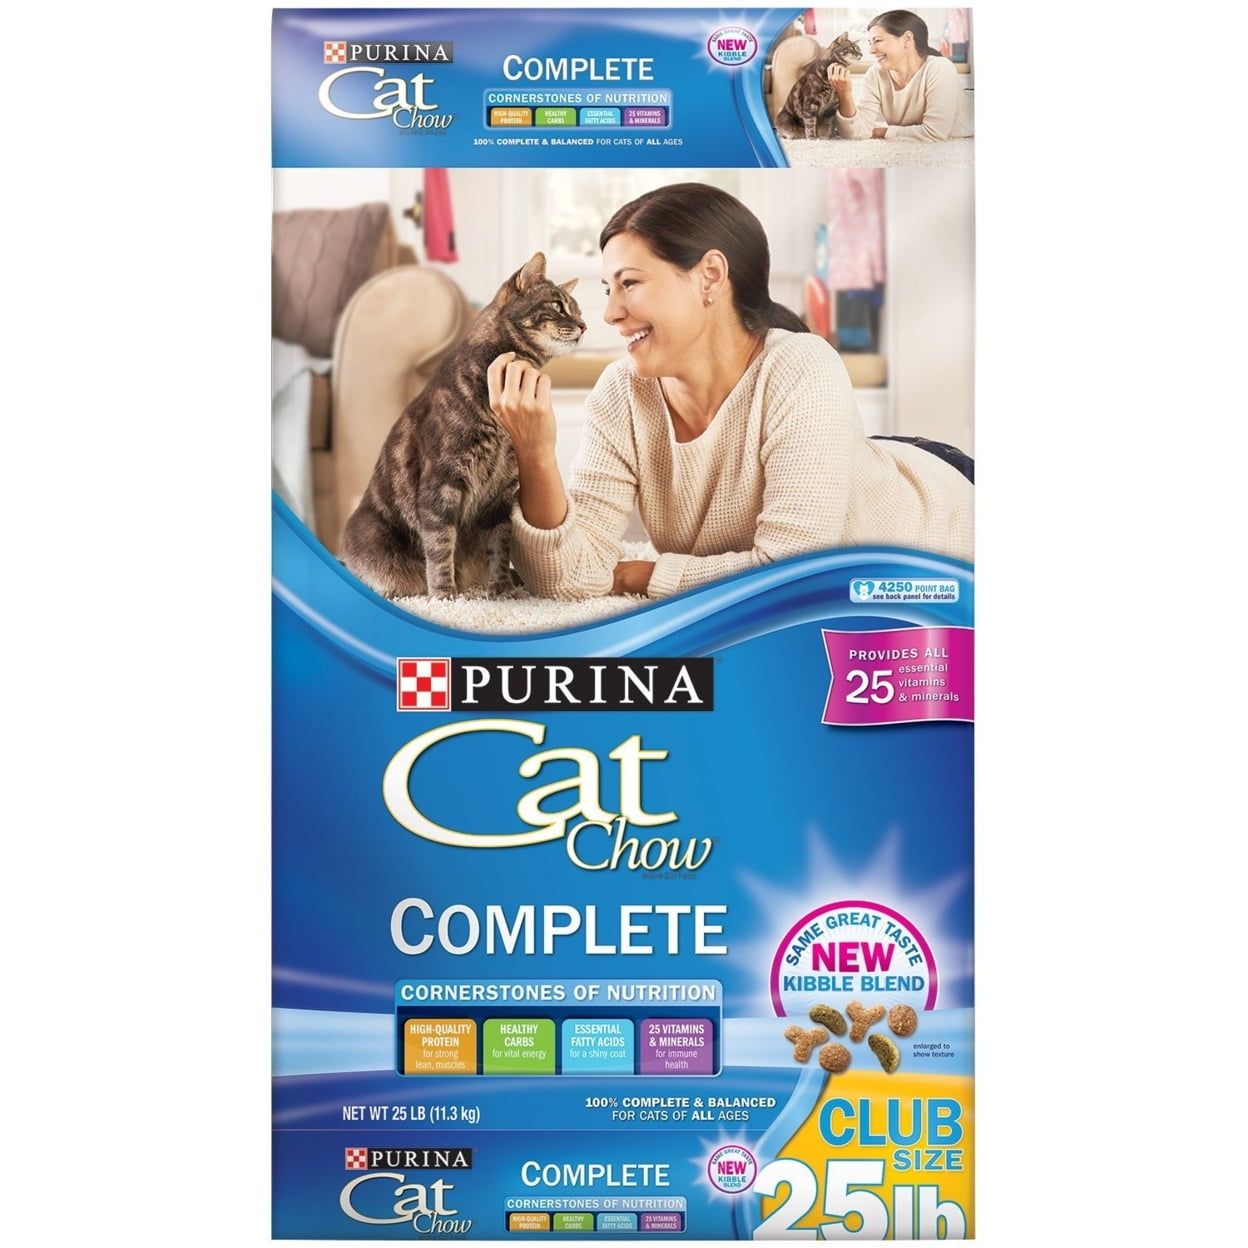 Purina Cat Chow Complete Dry Cat Food, 25 lb 